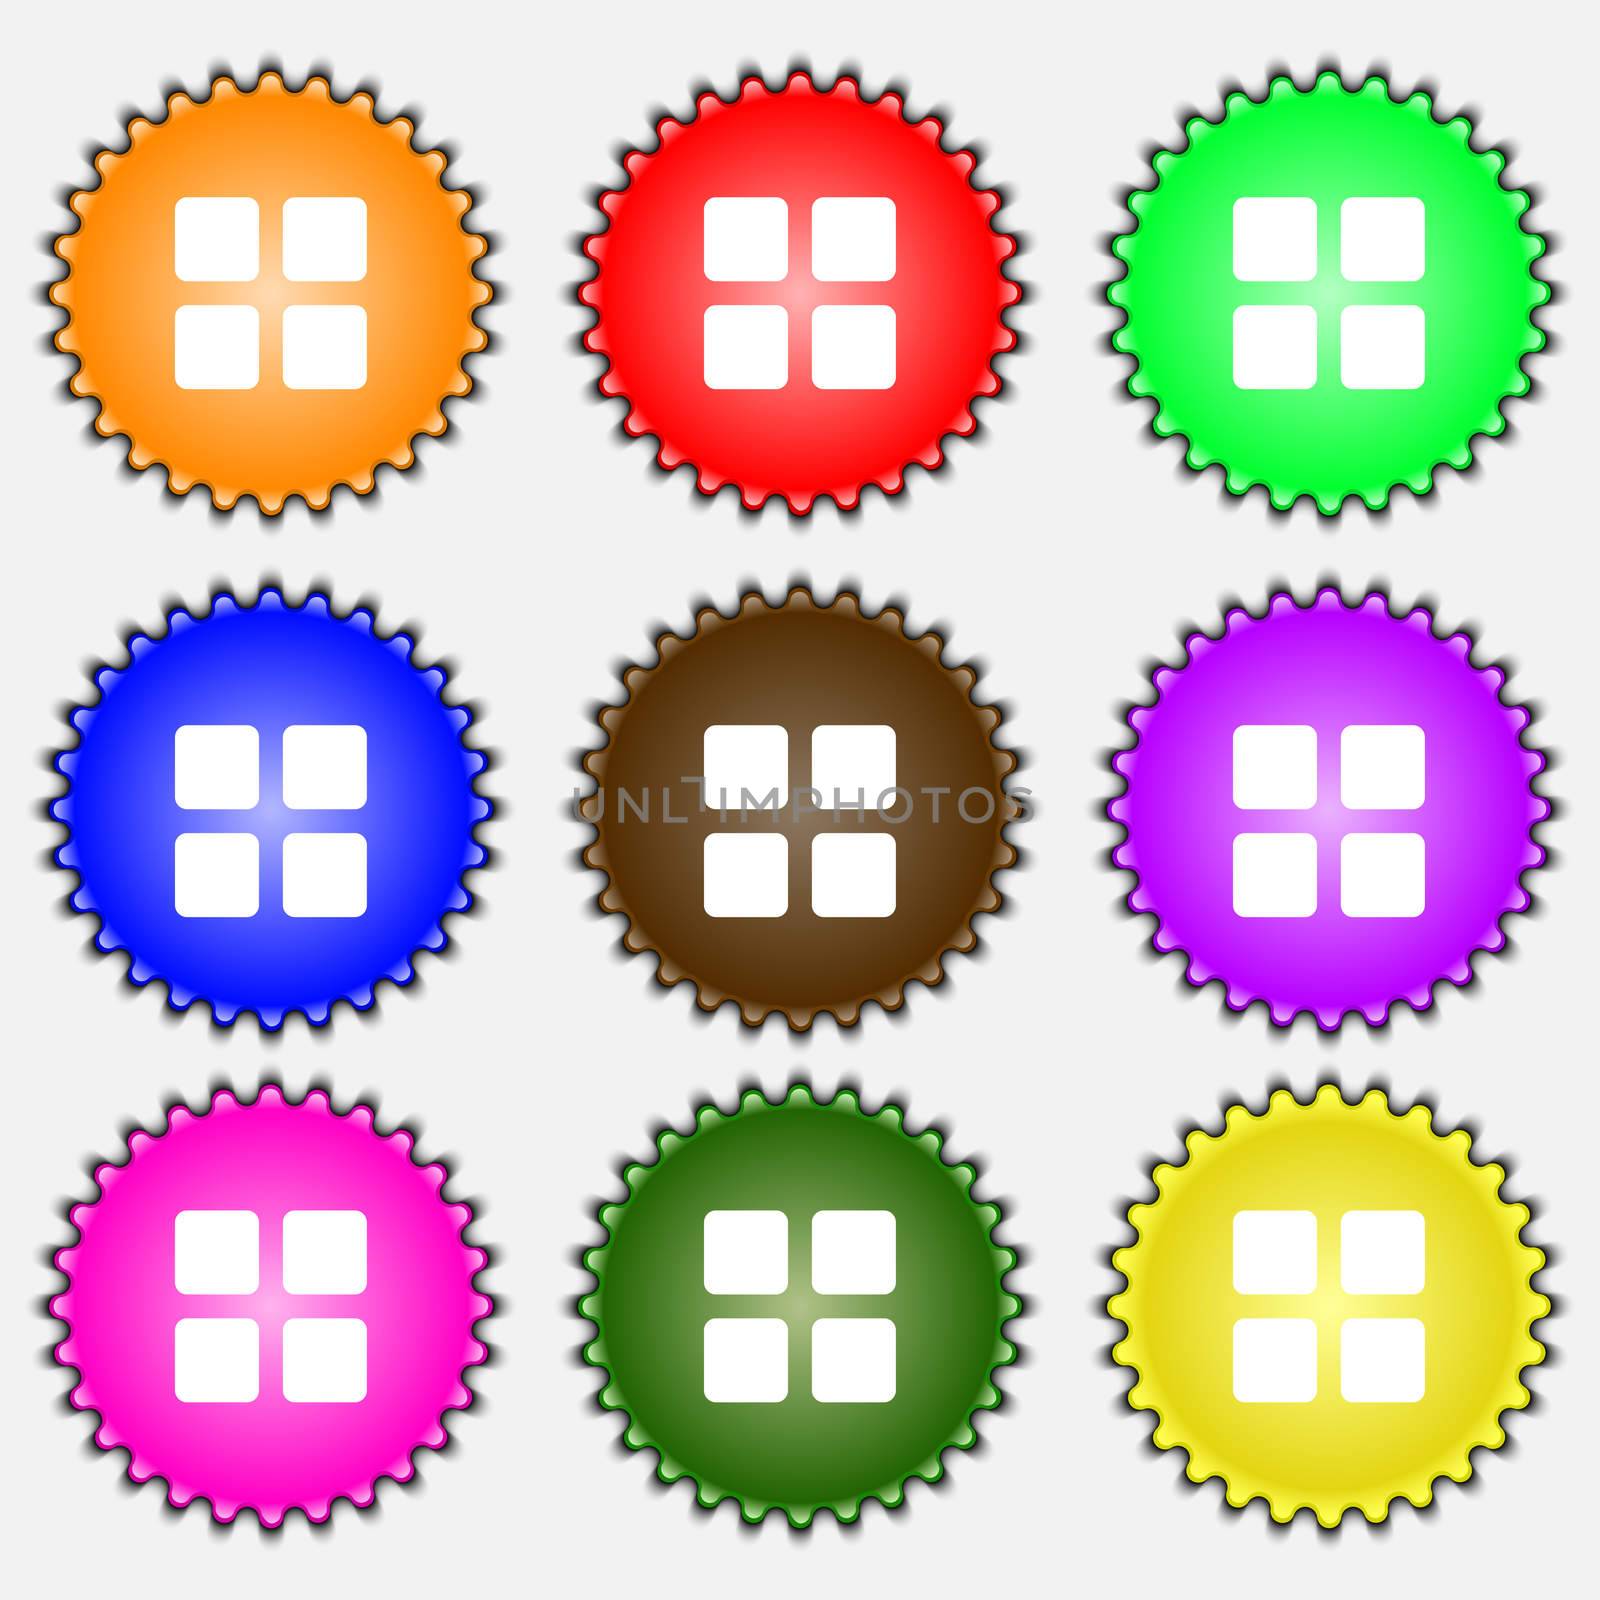 List menu, Content view options icon sign. A set of nine different colored labels. illustration 